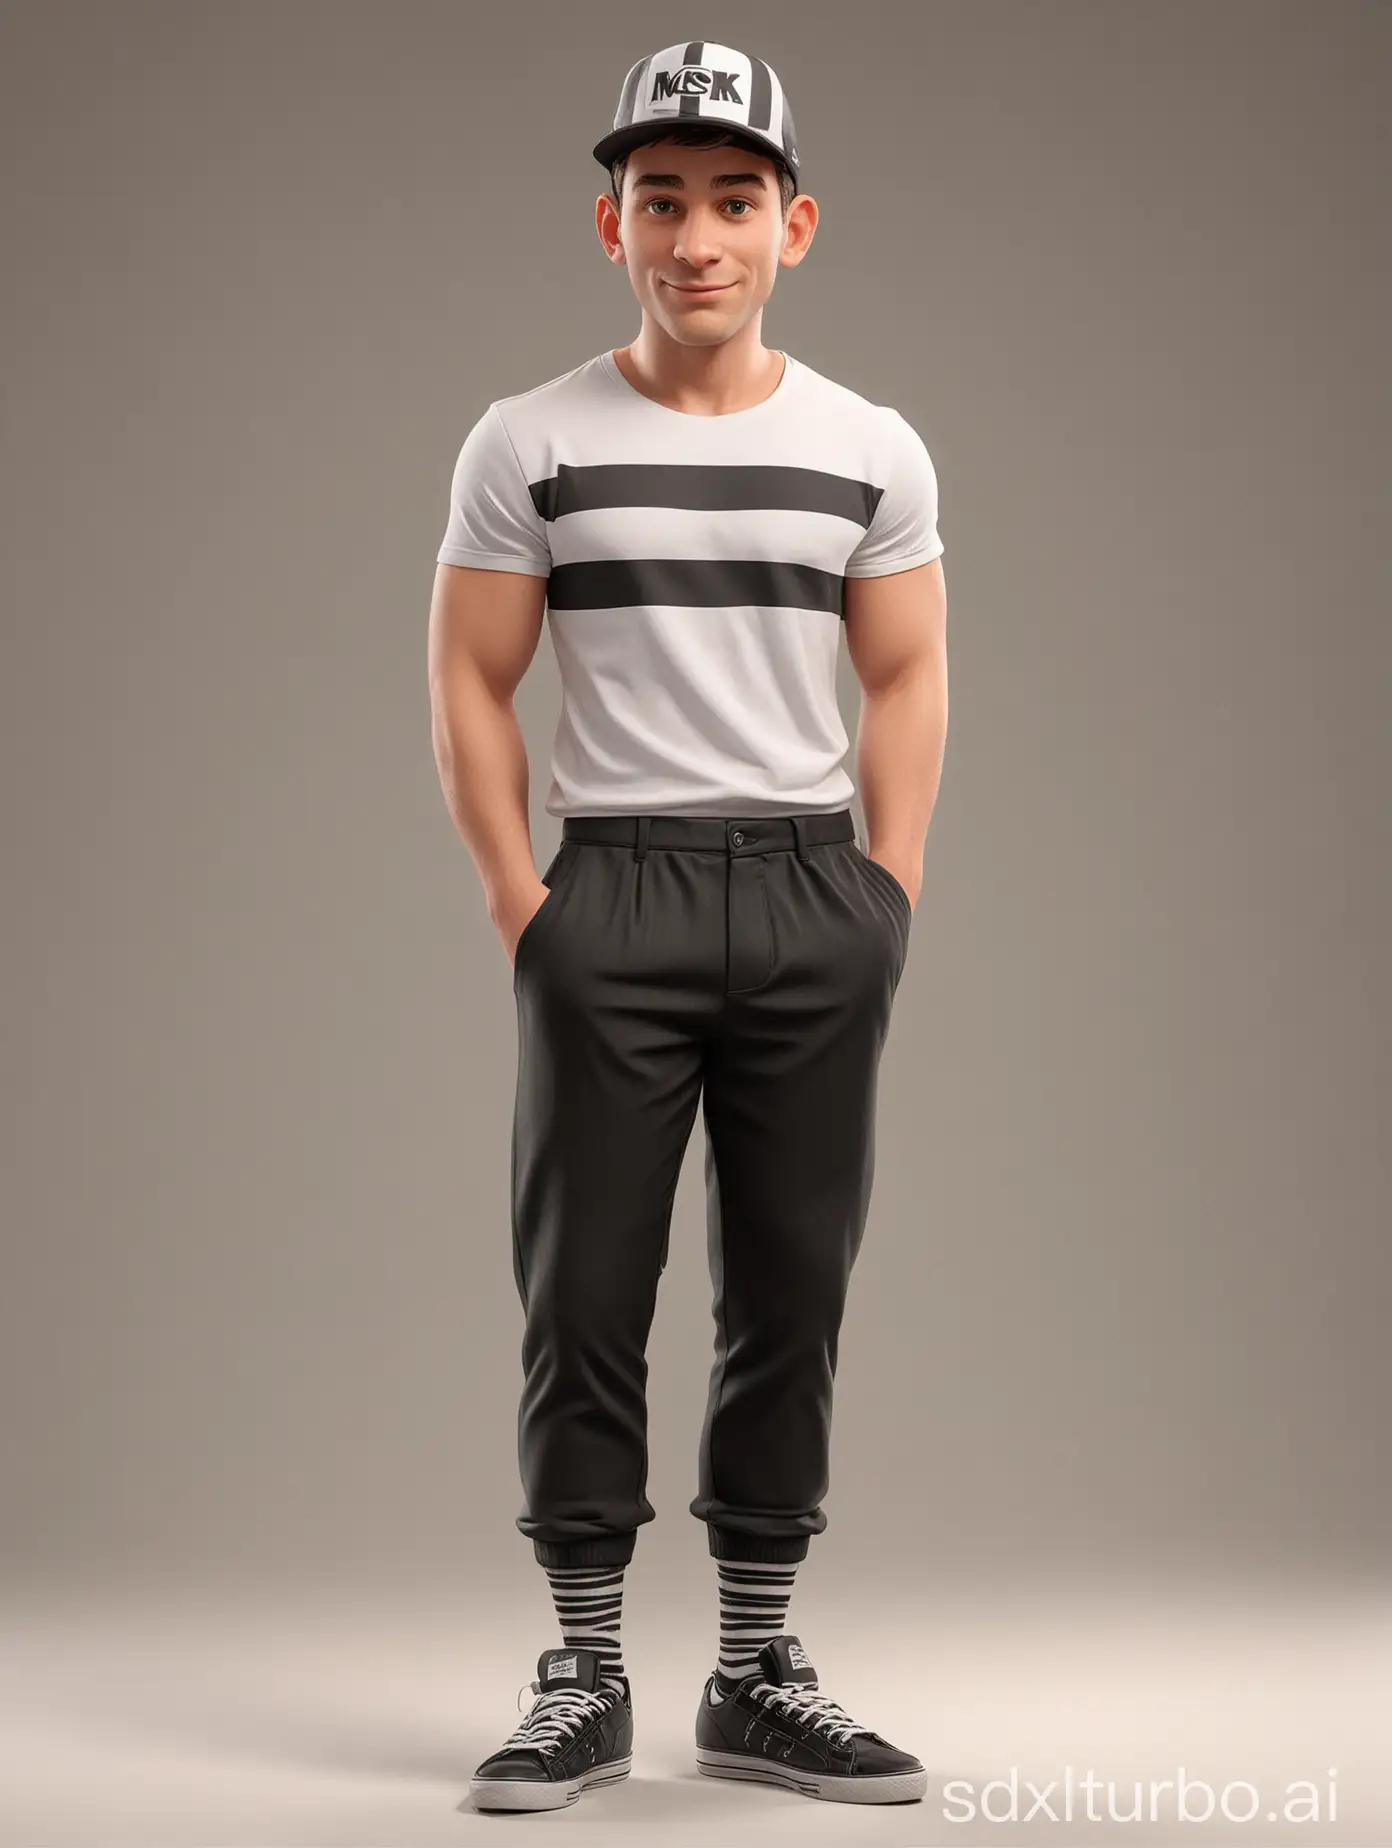 Create a realistic caricature 3D Cartoon style full body with a big head. A young man standing with proud pose. Thin body, wearing black cap, white t-shirt lettering "MK studio", black trousers. wearing black shoes combined with a black and white striped socks. Peach solid Colored background. Use soft photography lighting, top lighting, side lighting. high resolution images, Uhd, 16k.